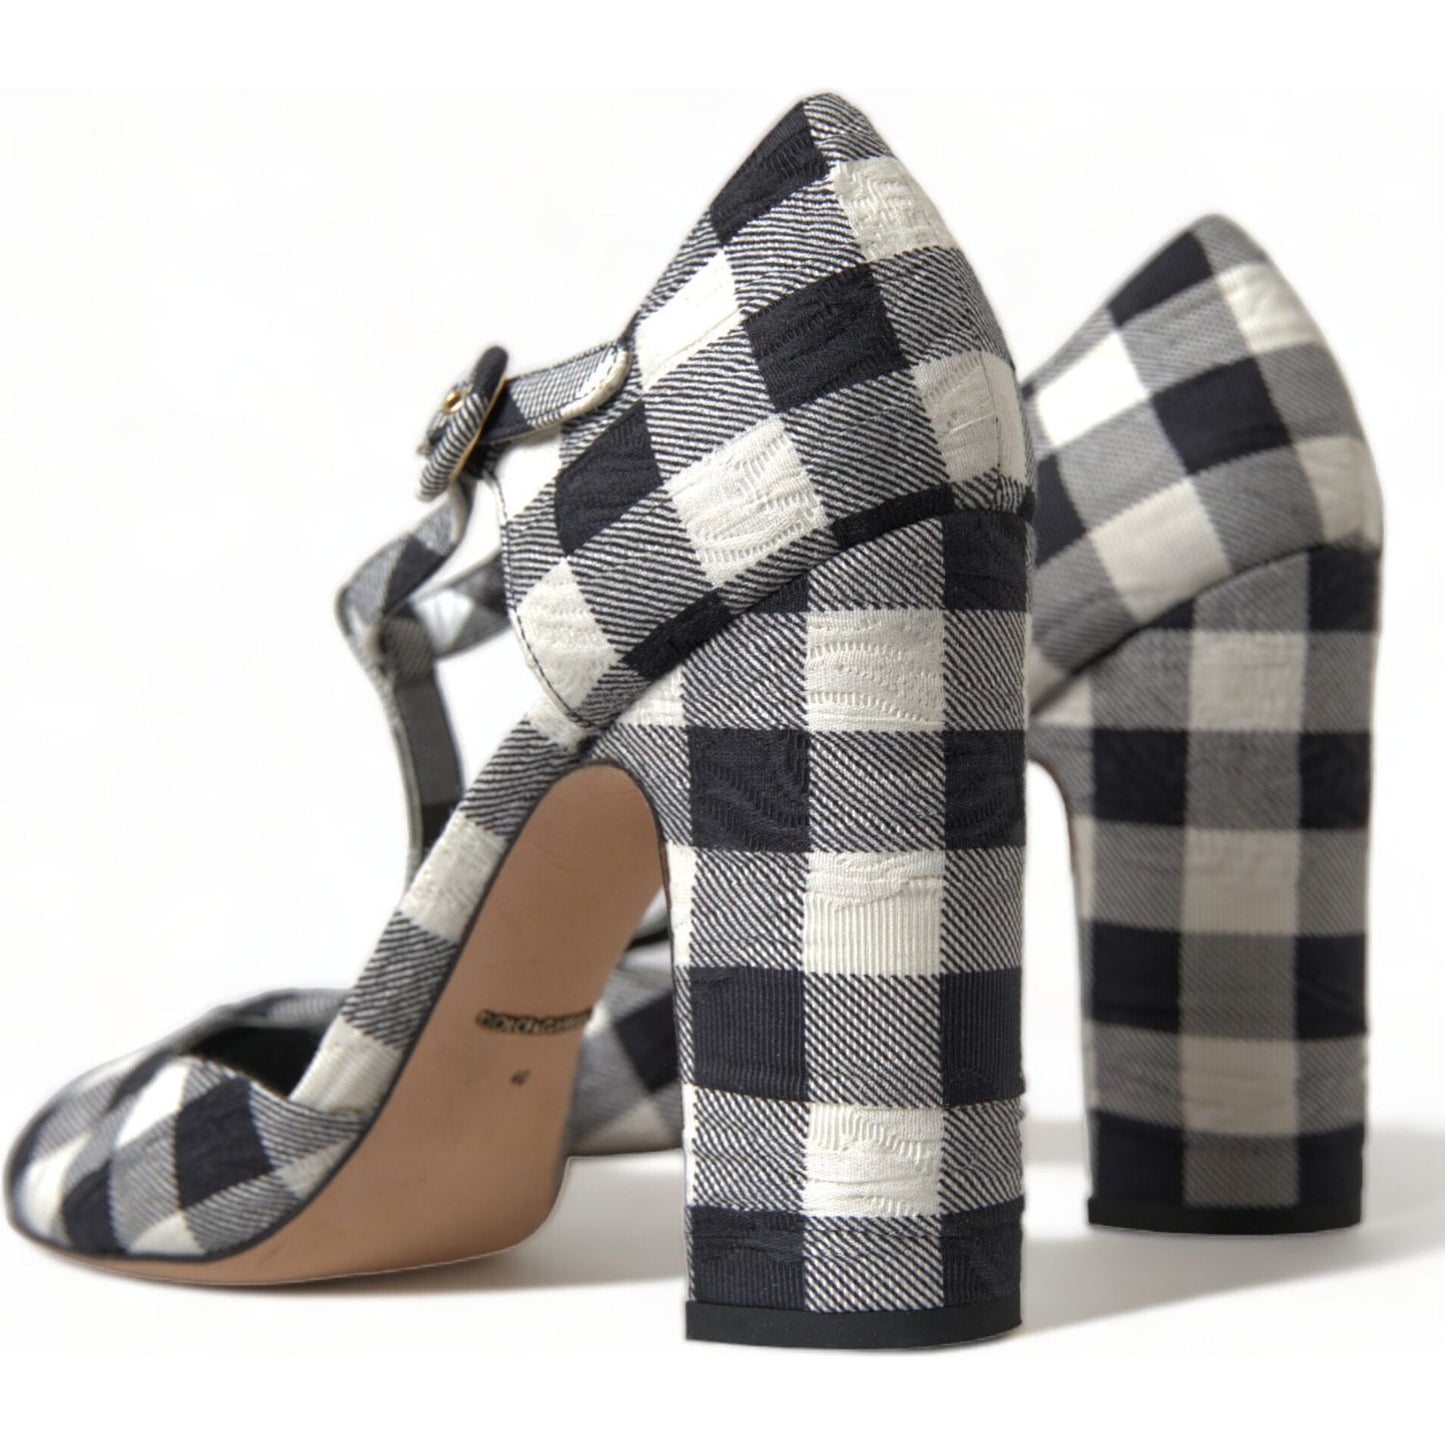 Dolce & Gabbana Chic Gingham T-Strap Pumps: Timeless Mary Jane Heels black-white-gingham-brocade-mary-janes-shoes